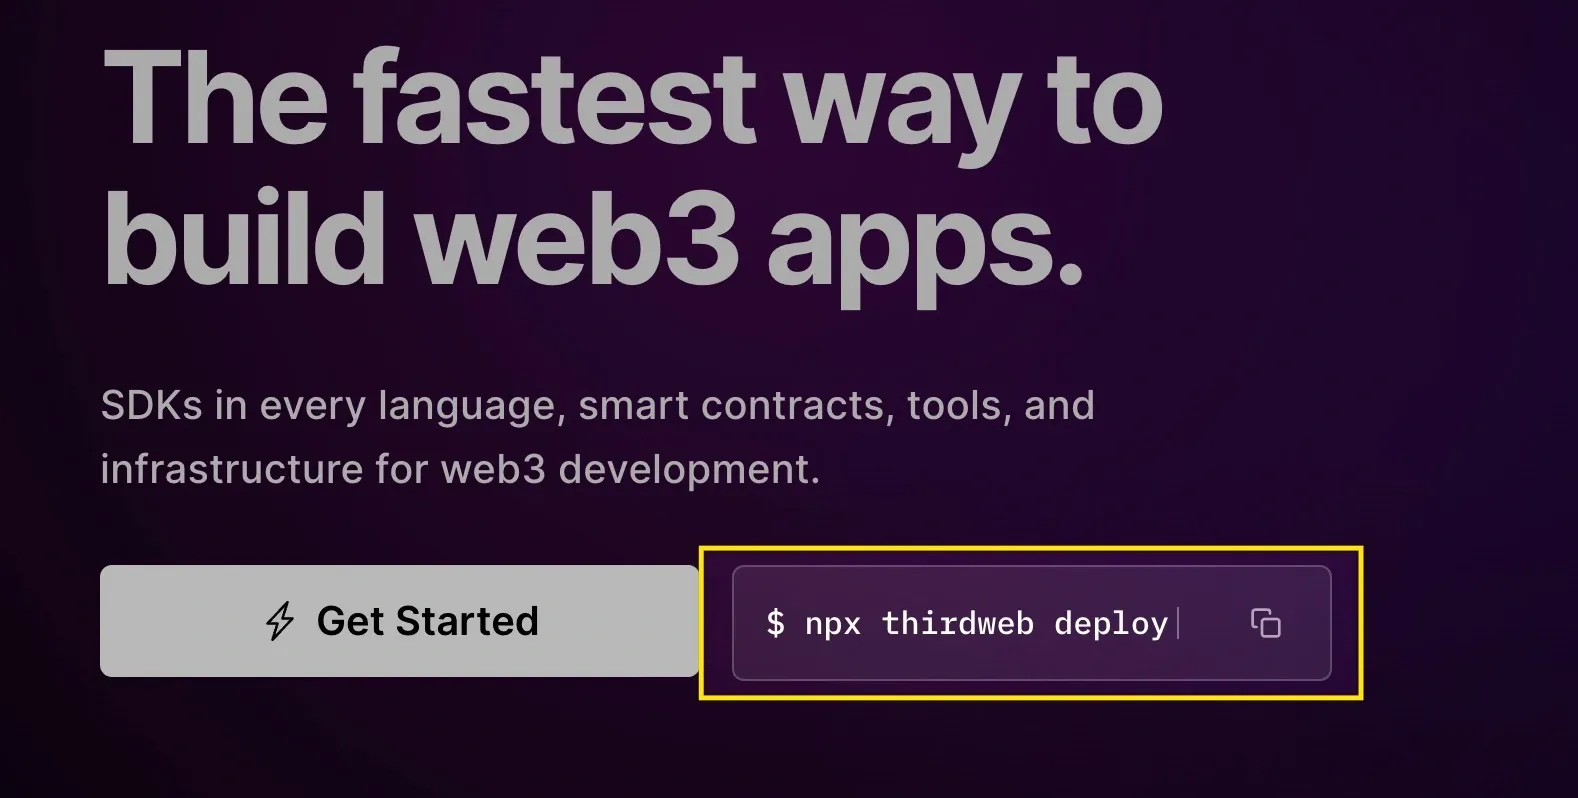 Thirdweb home page with $npx thirdweb deploy button highlighted